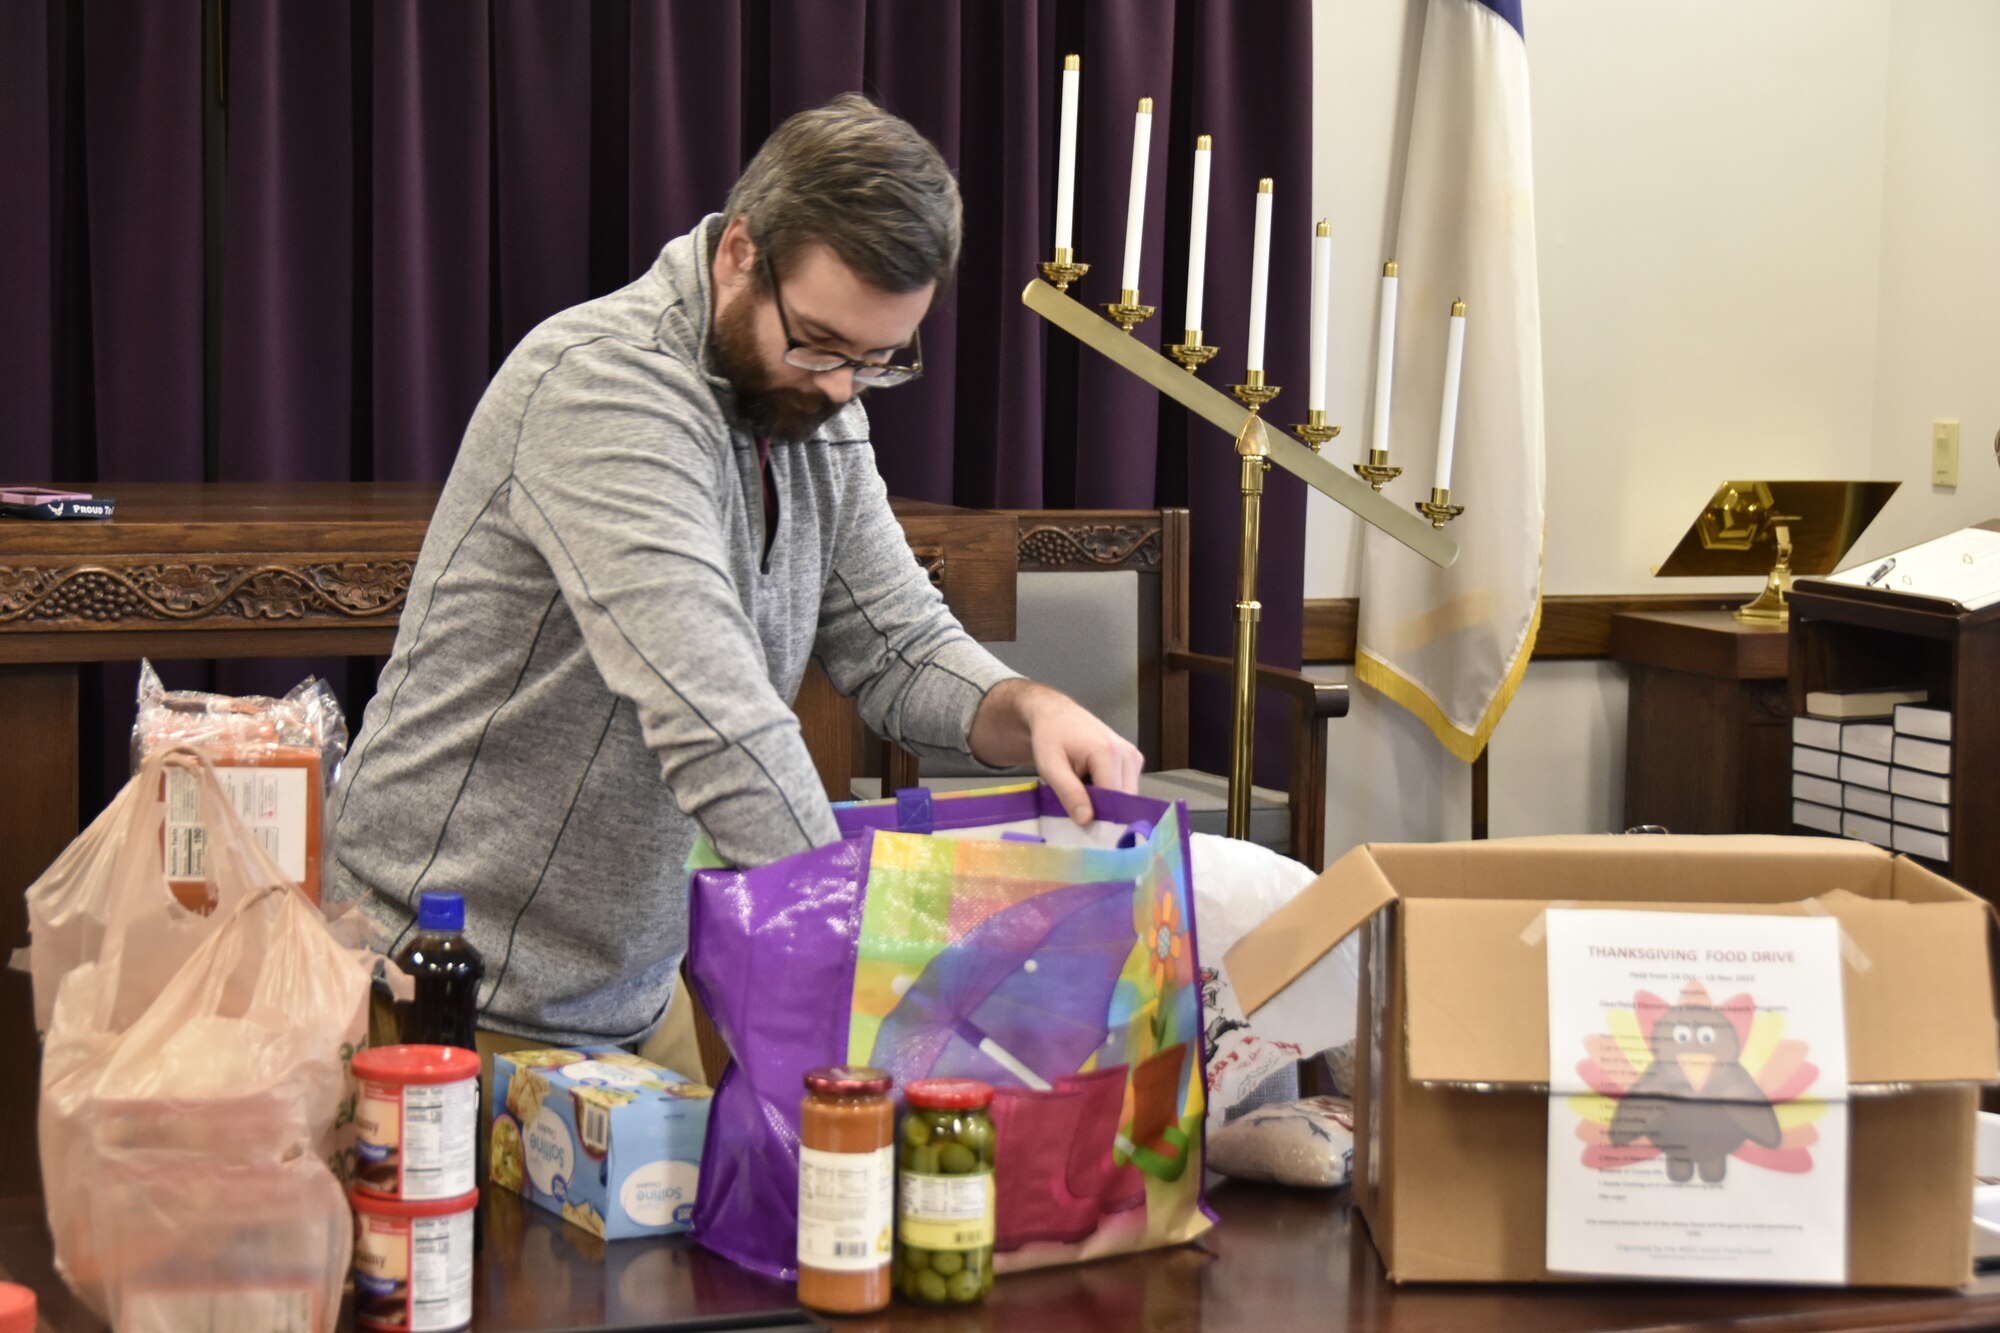 AEDC team member Adam Moon checks one of the bags of food donated as part of a food drive.